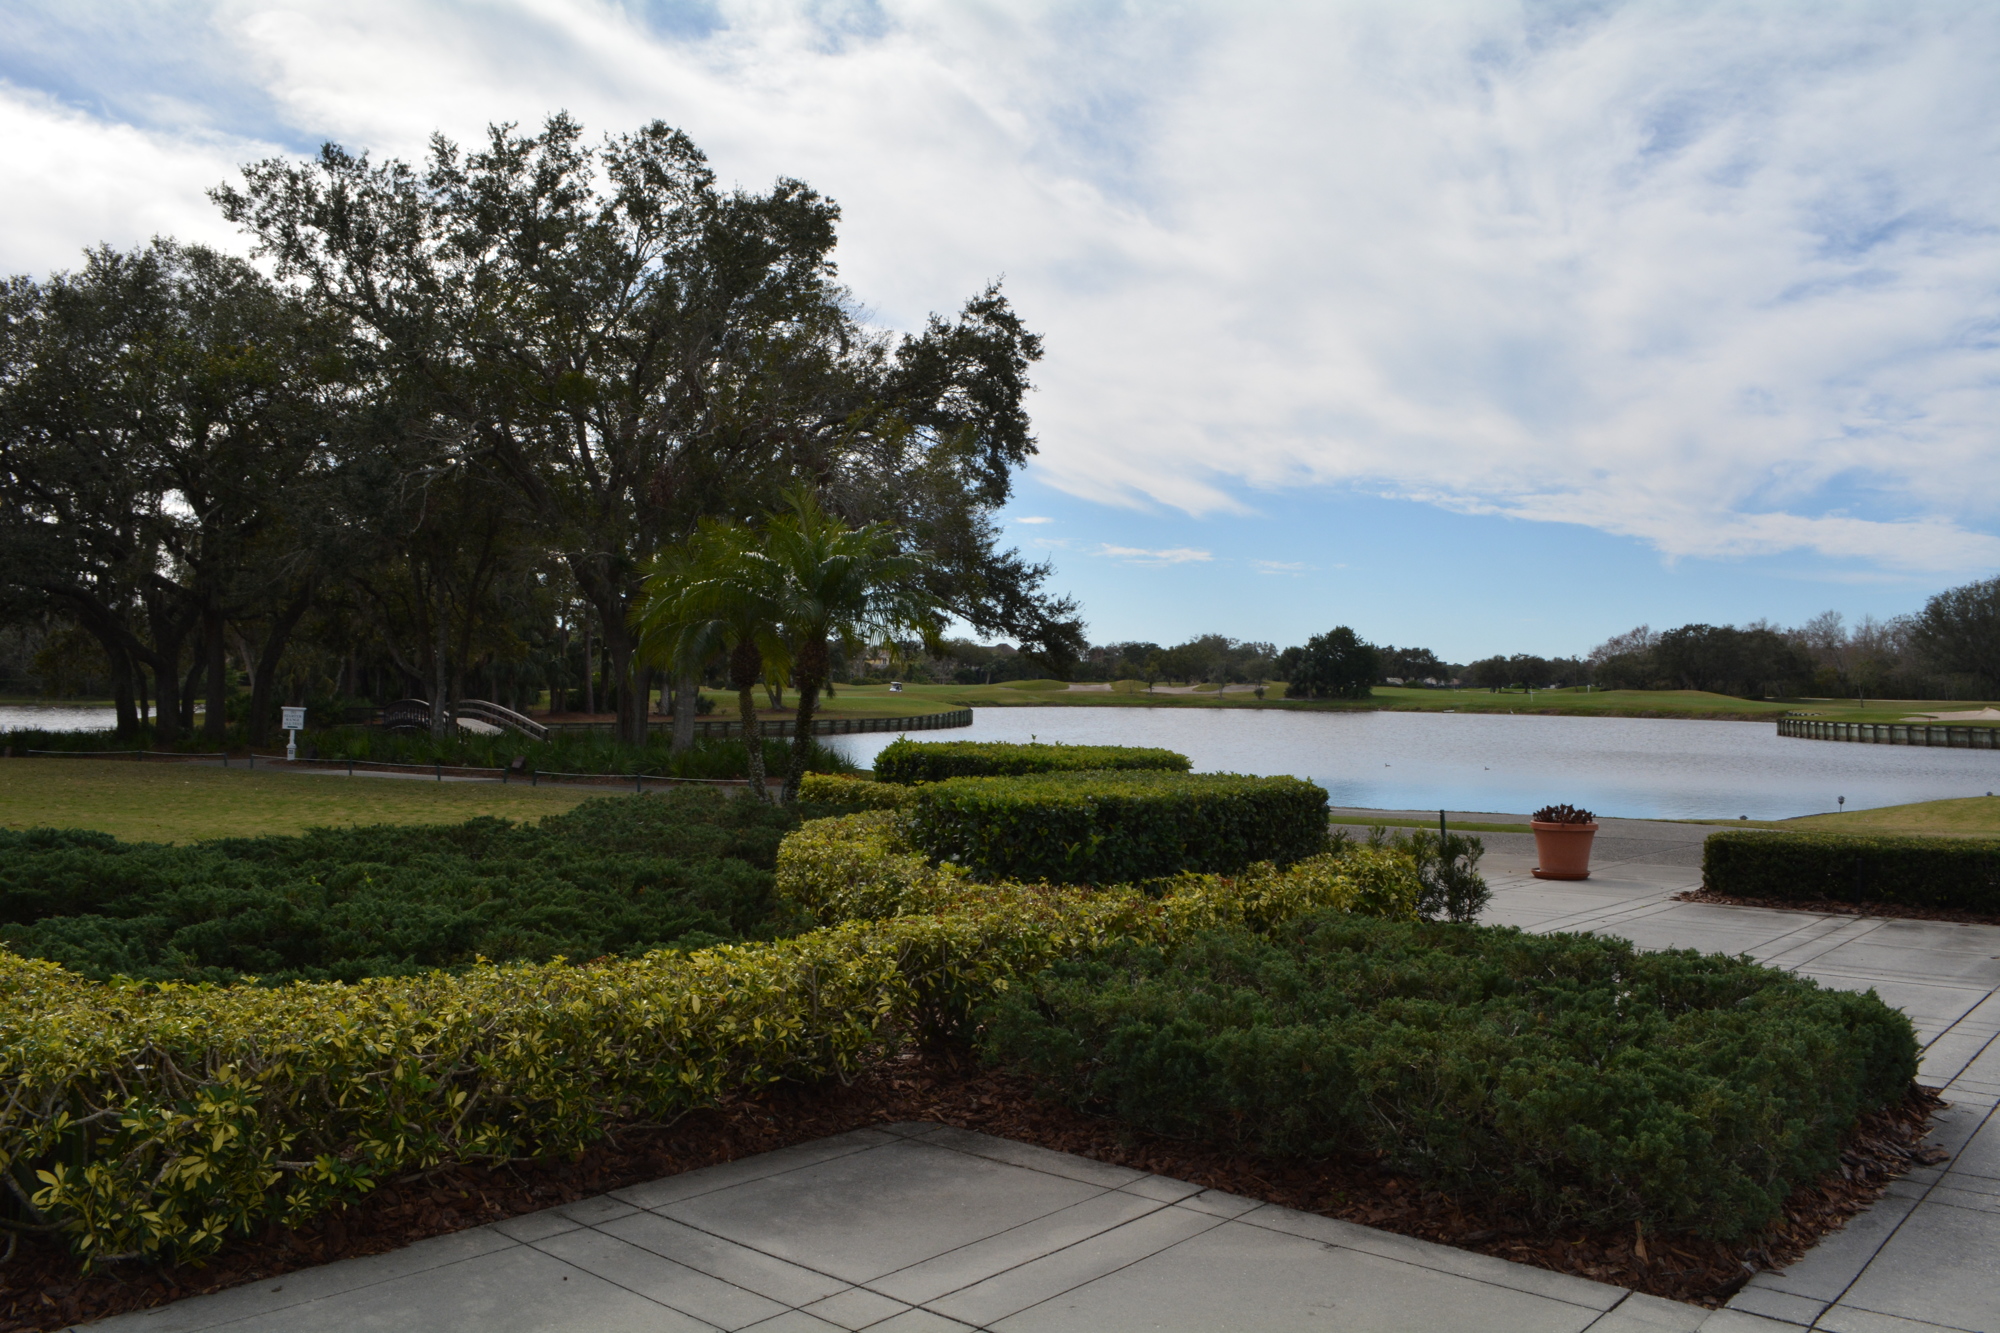 University Park Country Club has 266 acres including its amenity center and golf course.